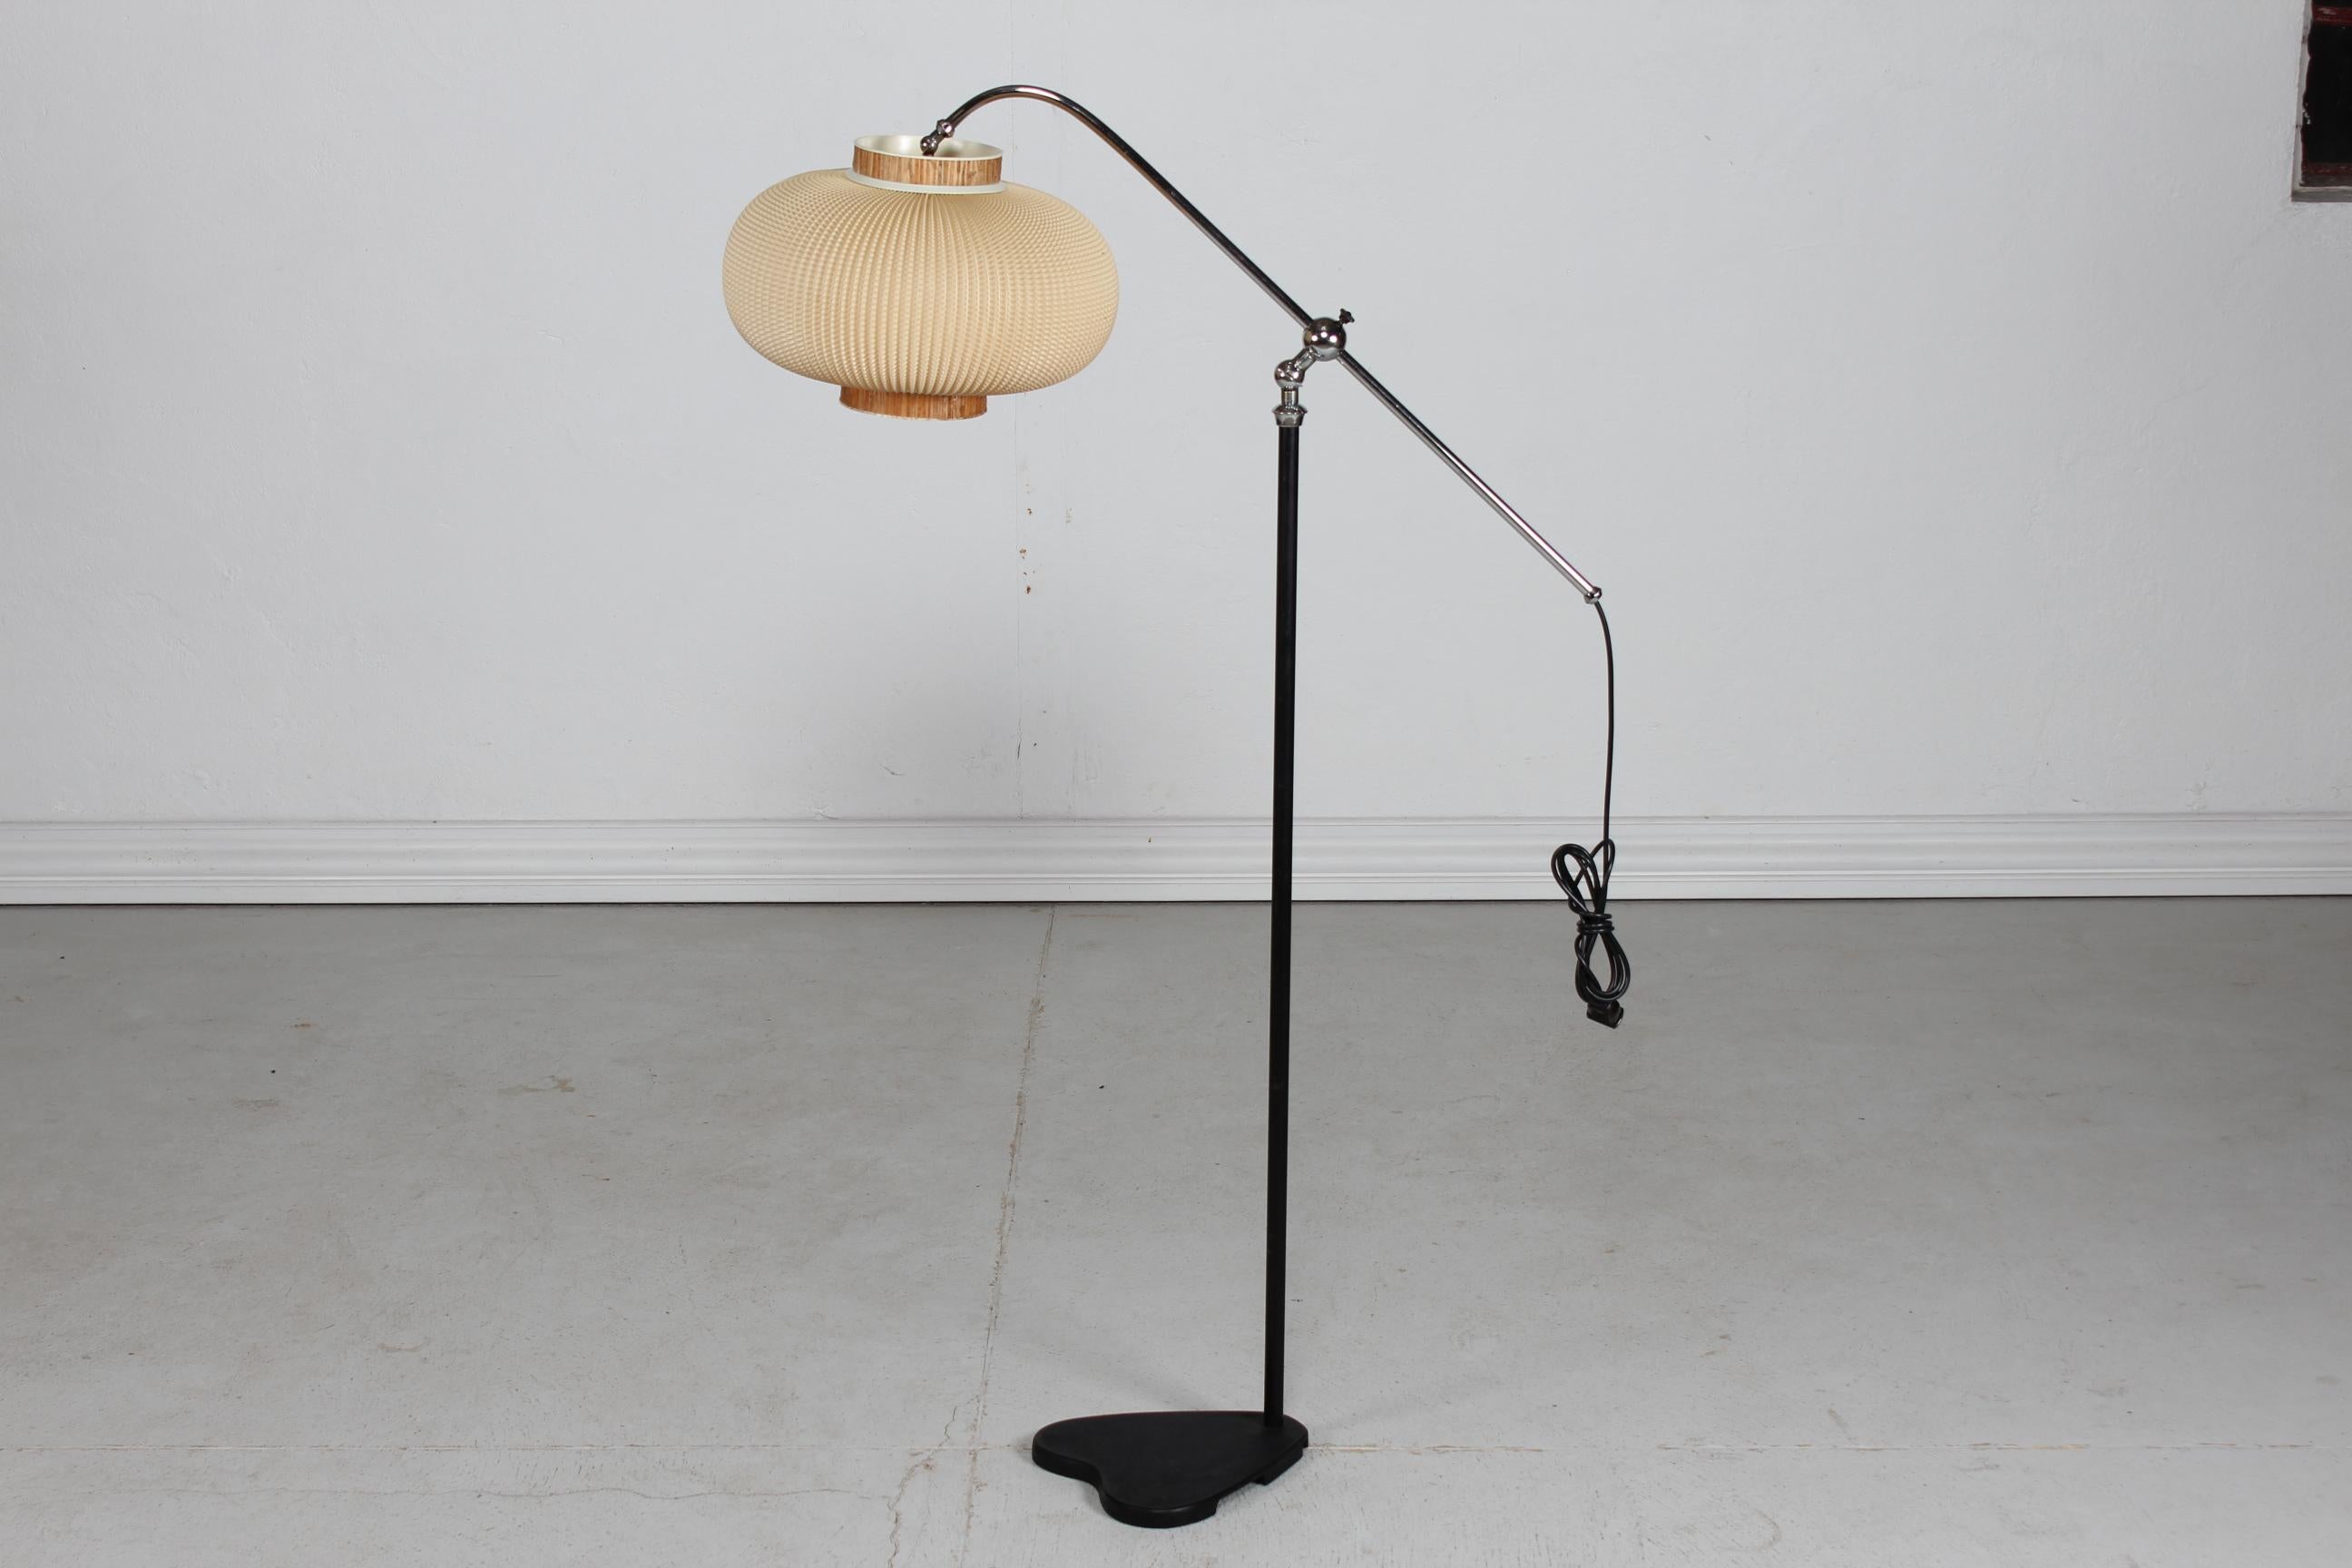 Art Deco height adjustable floor lamp made in the 1940s mounted with a Lars Eiler Schiøler shade from the 1960s.
The lamp has a duck foot shaped foot made of metal with black lacquer. 
The top part is made of chrome plated metal with a adjustable